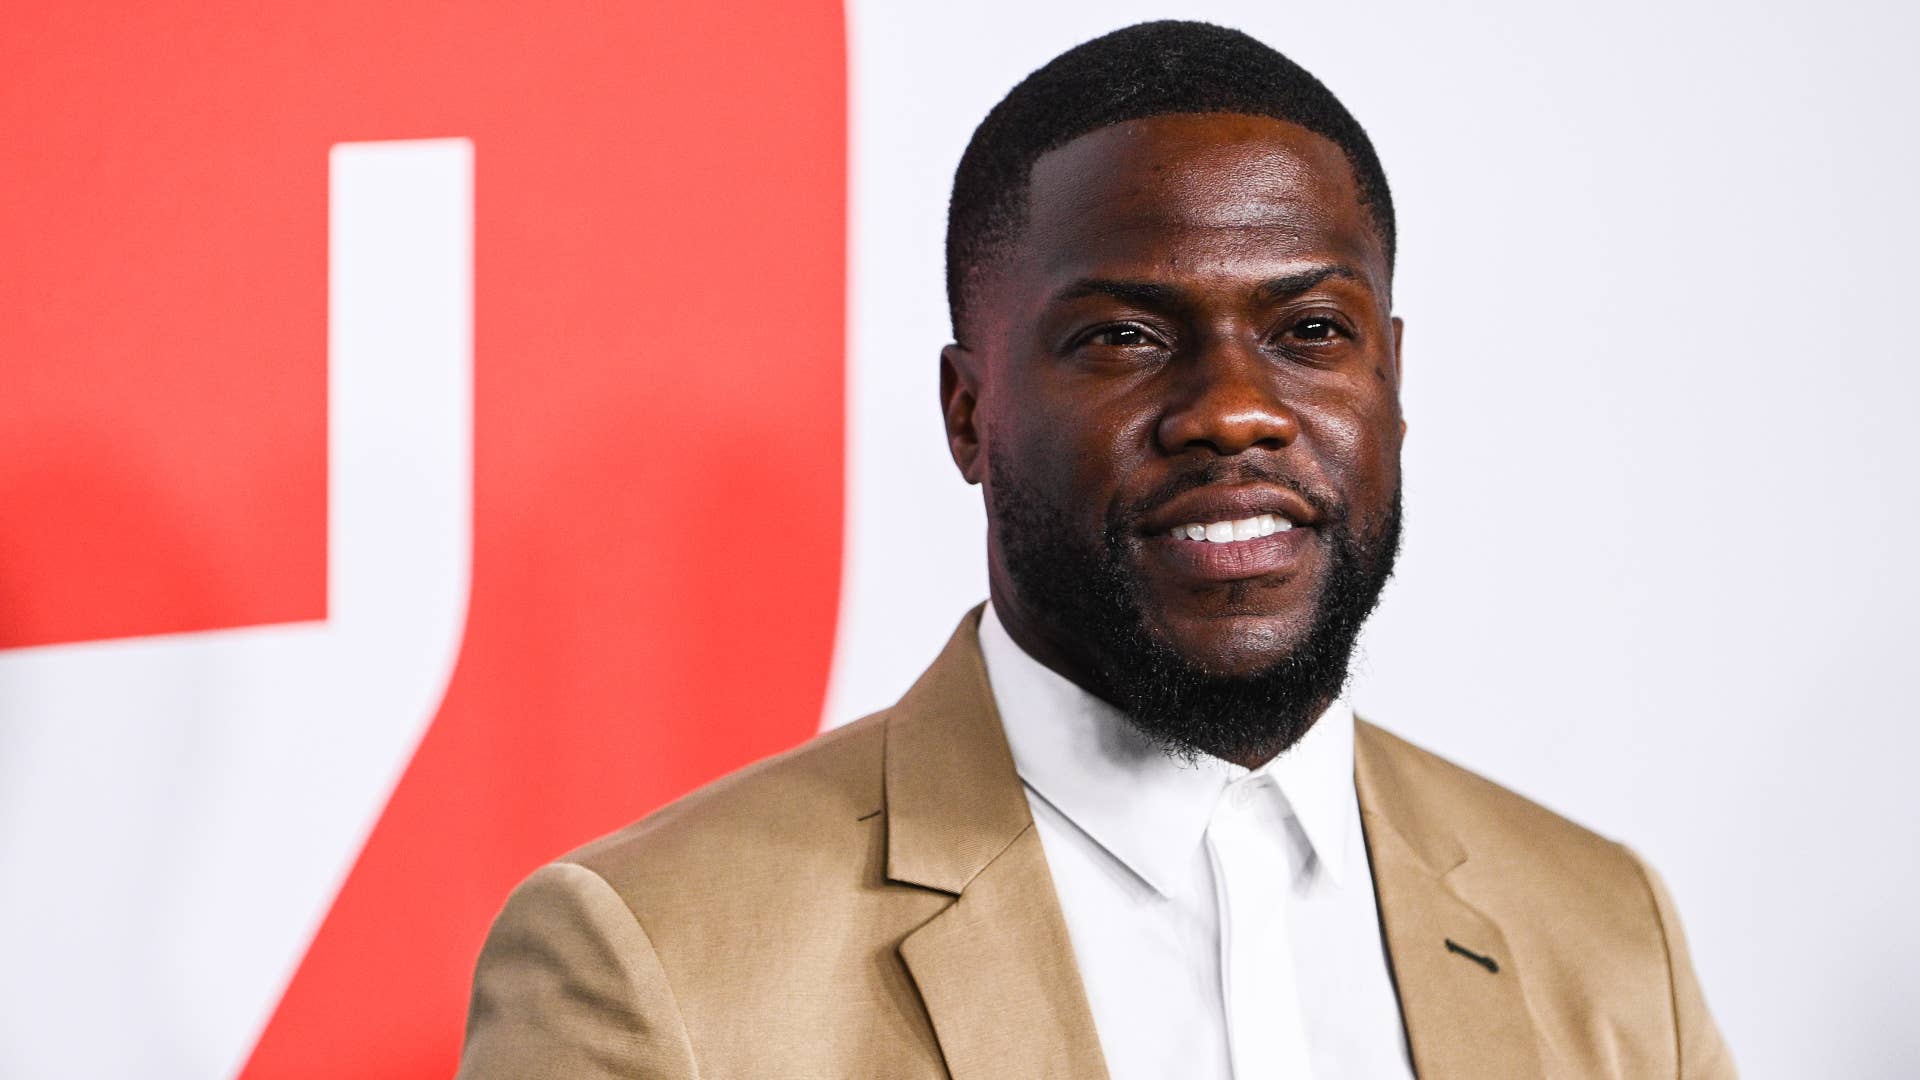 Kevin Hart attends the Australian premiere of 'The Secret Life of Pets 2' during the Sydney Film Festival.